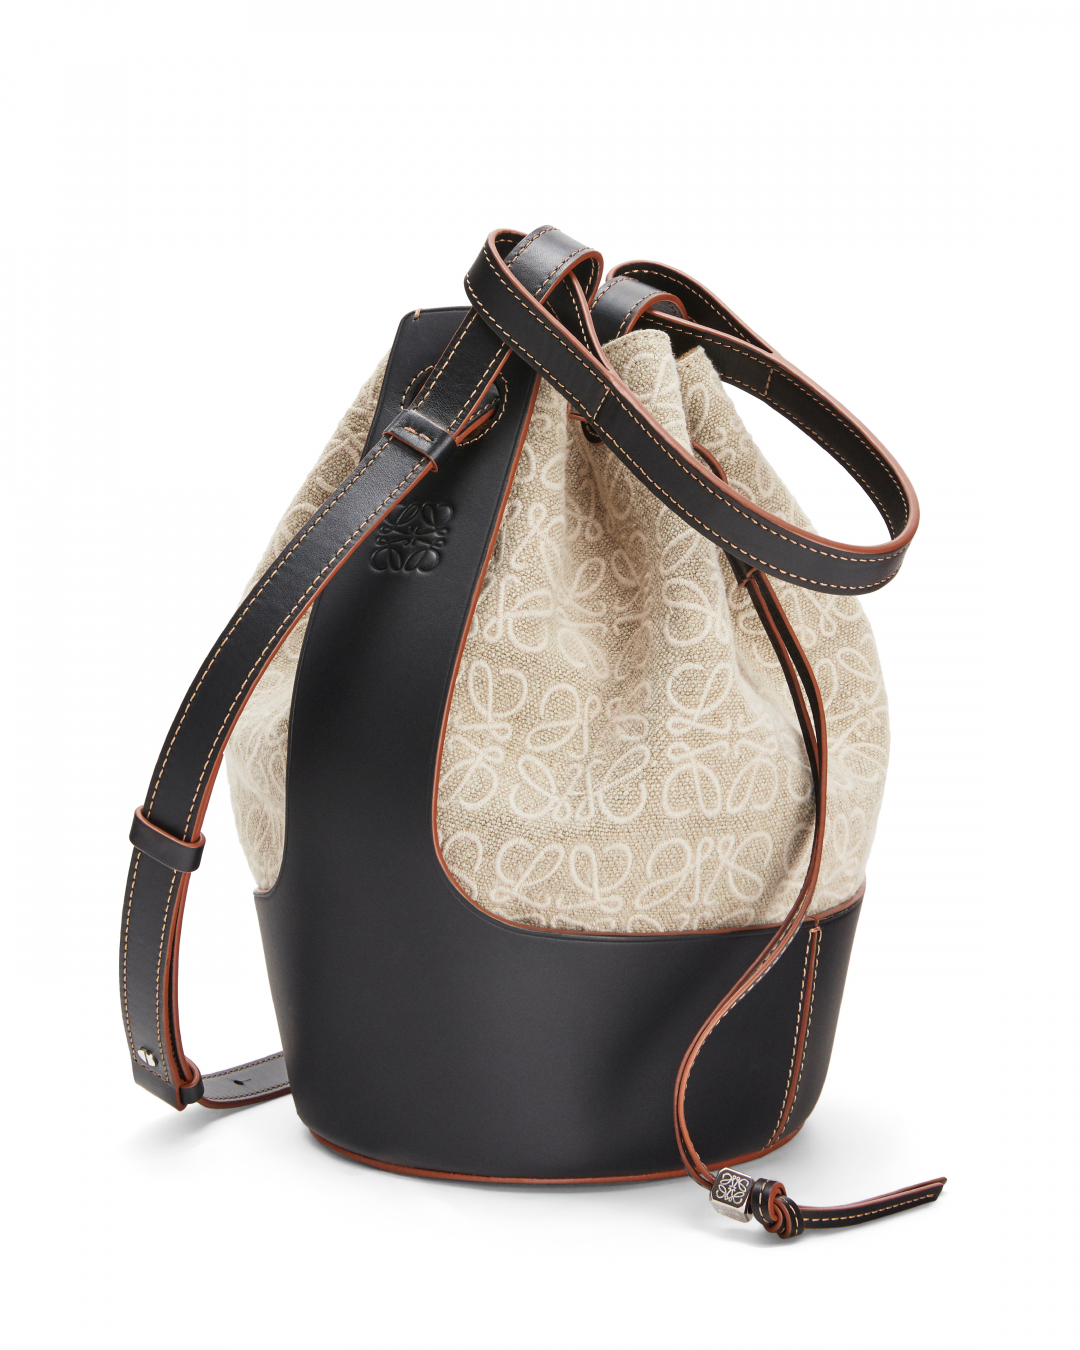 LOEWE - Signature shapes crafted in canvas and leather, including the Balloon bag, are embroidered with the LOEWE anagram motif.

See the range from the FW20 precollection in store and on loewe.com

#...